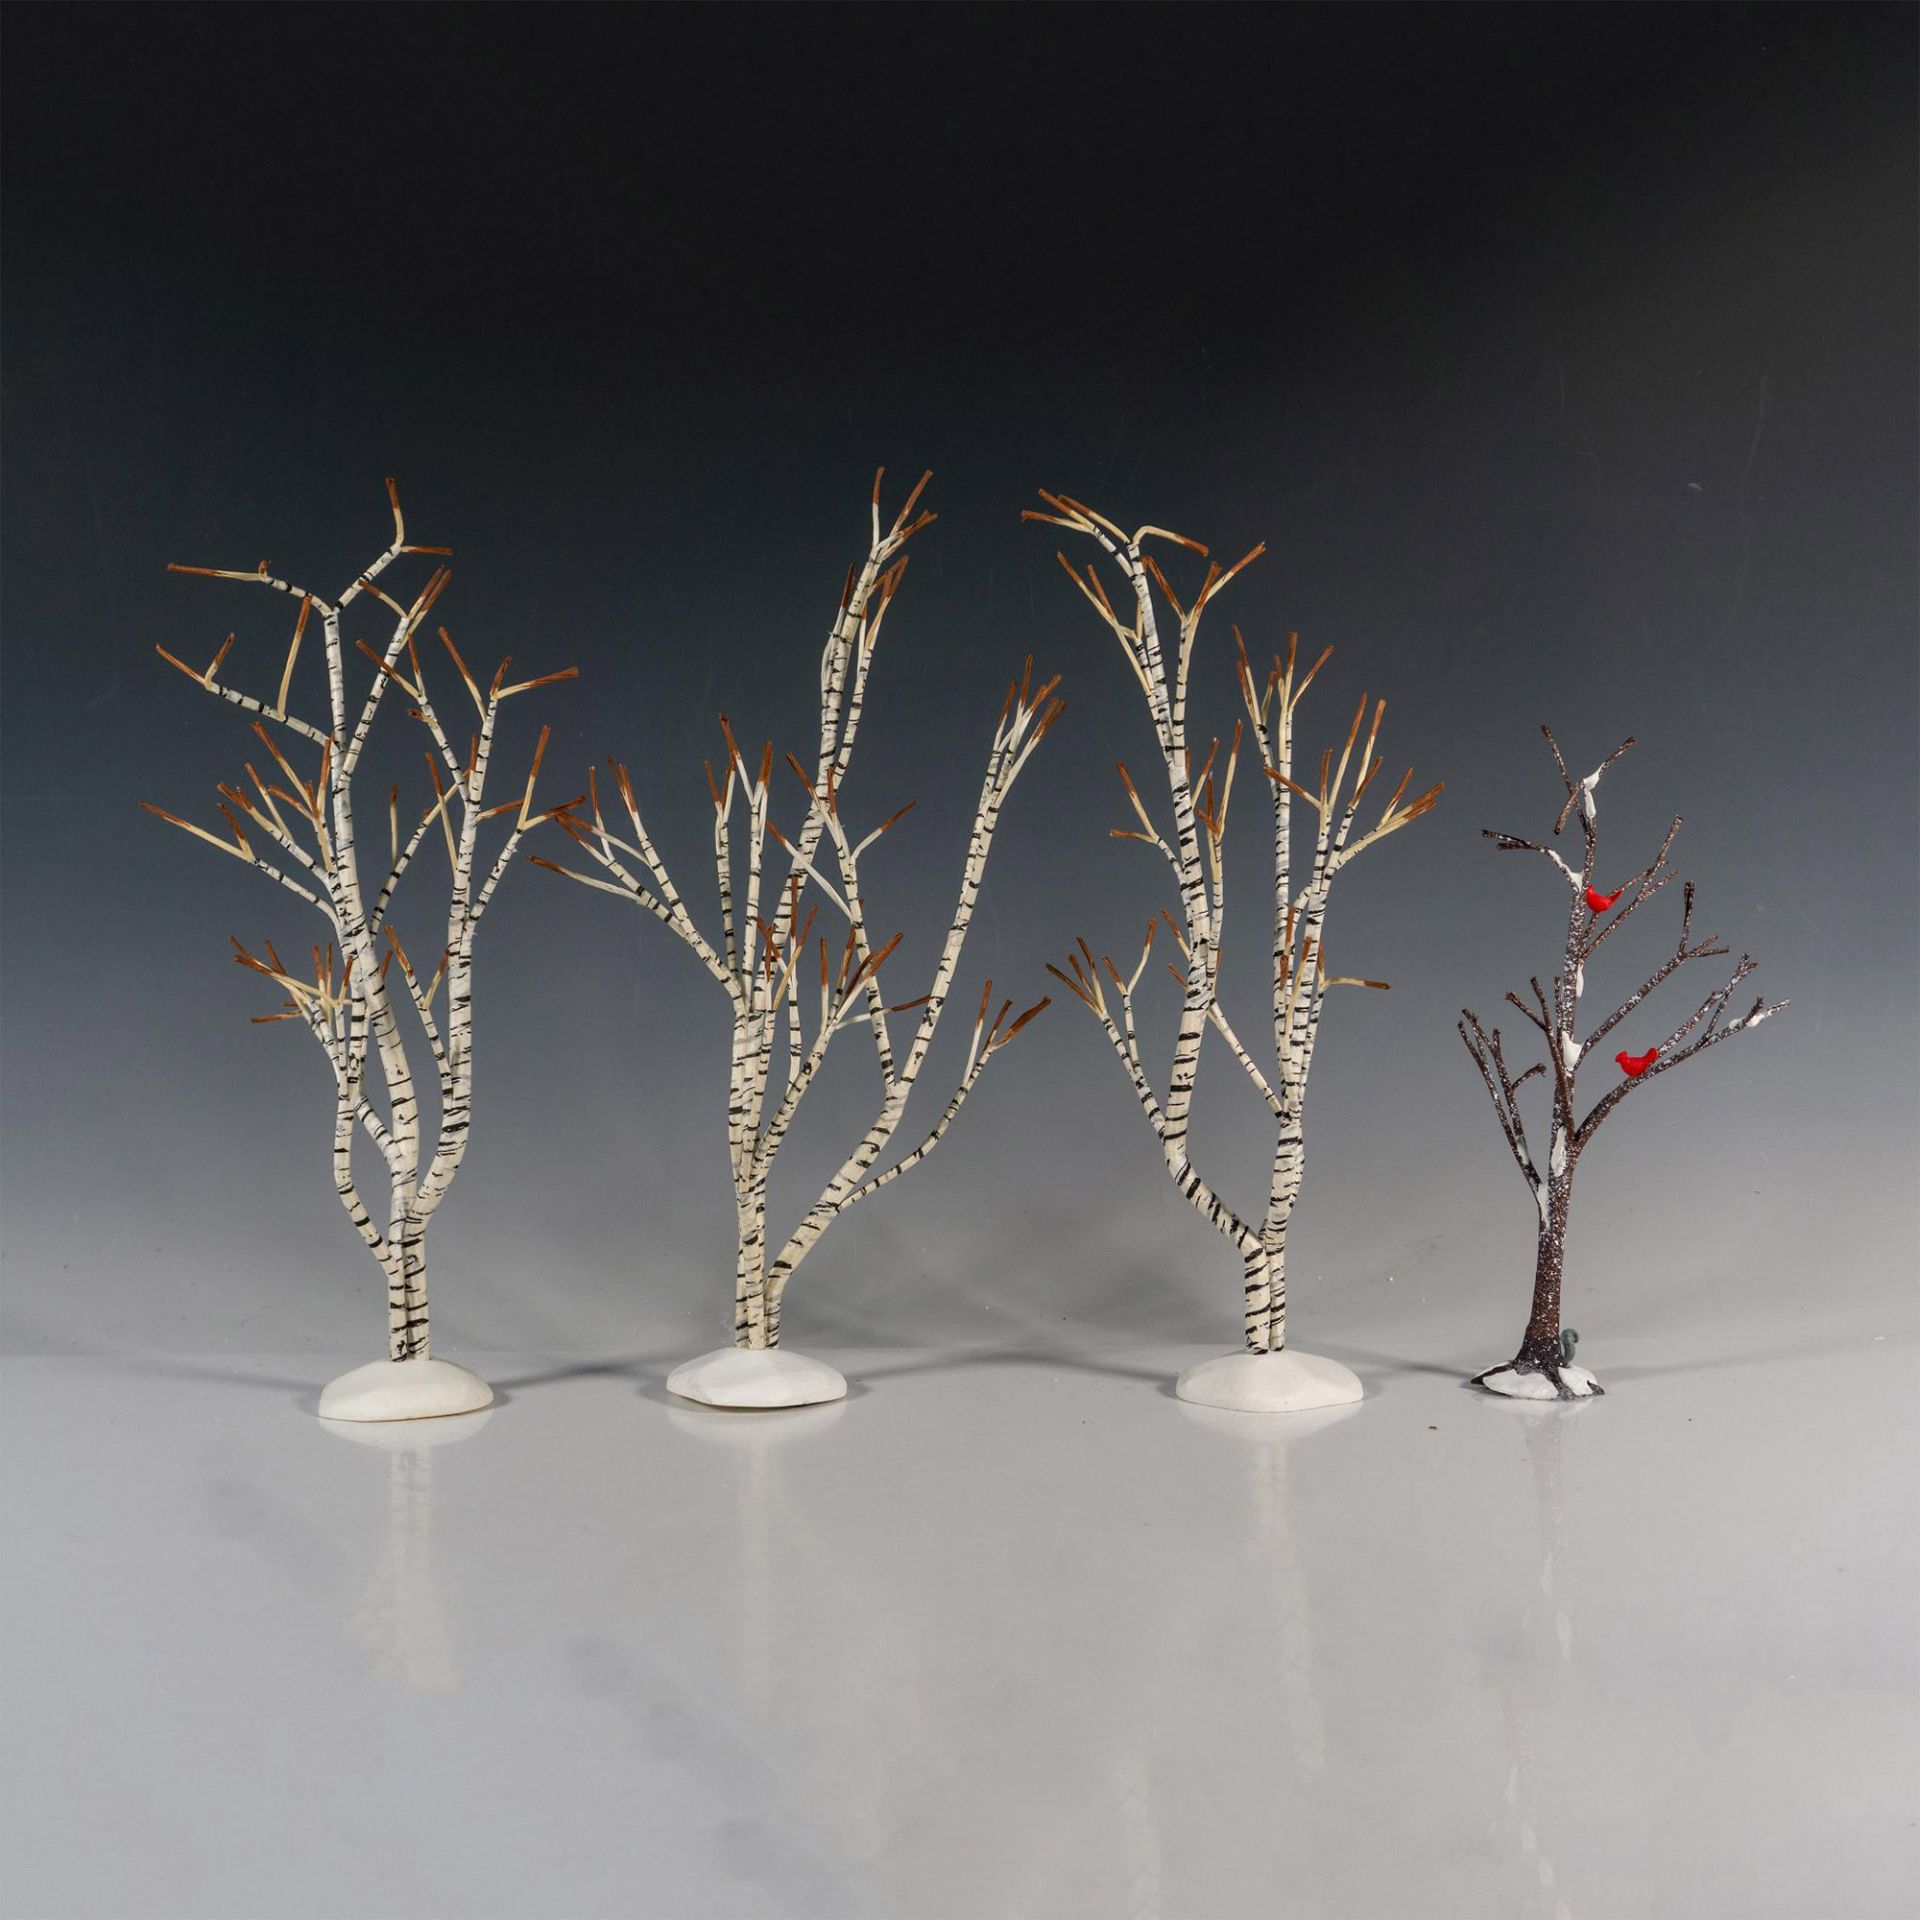 5pc Department 56 Village Trees and Spotlights - Image 2 of 3